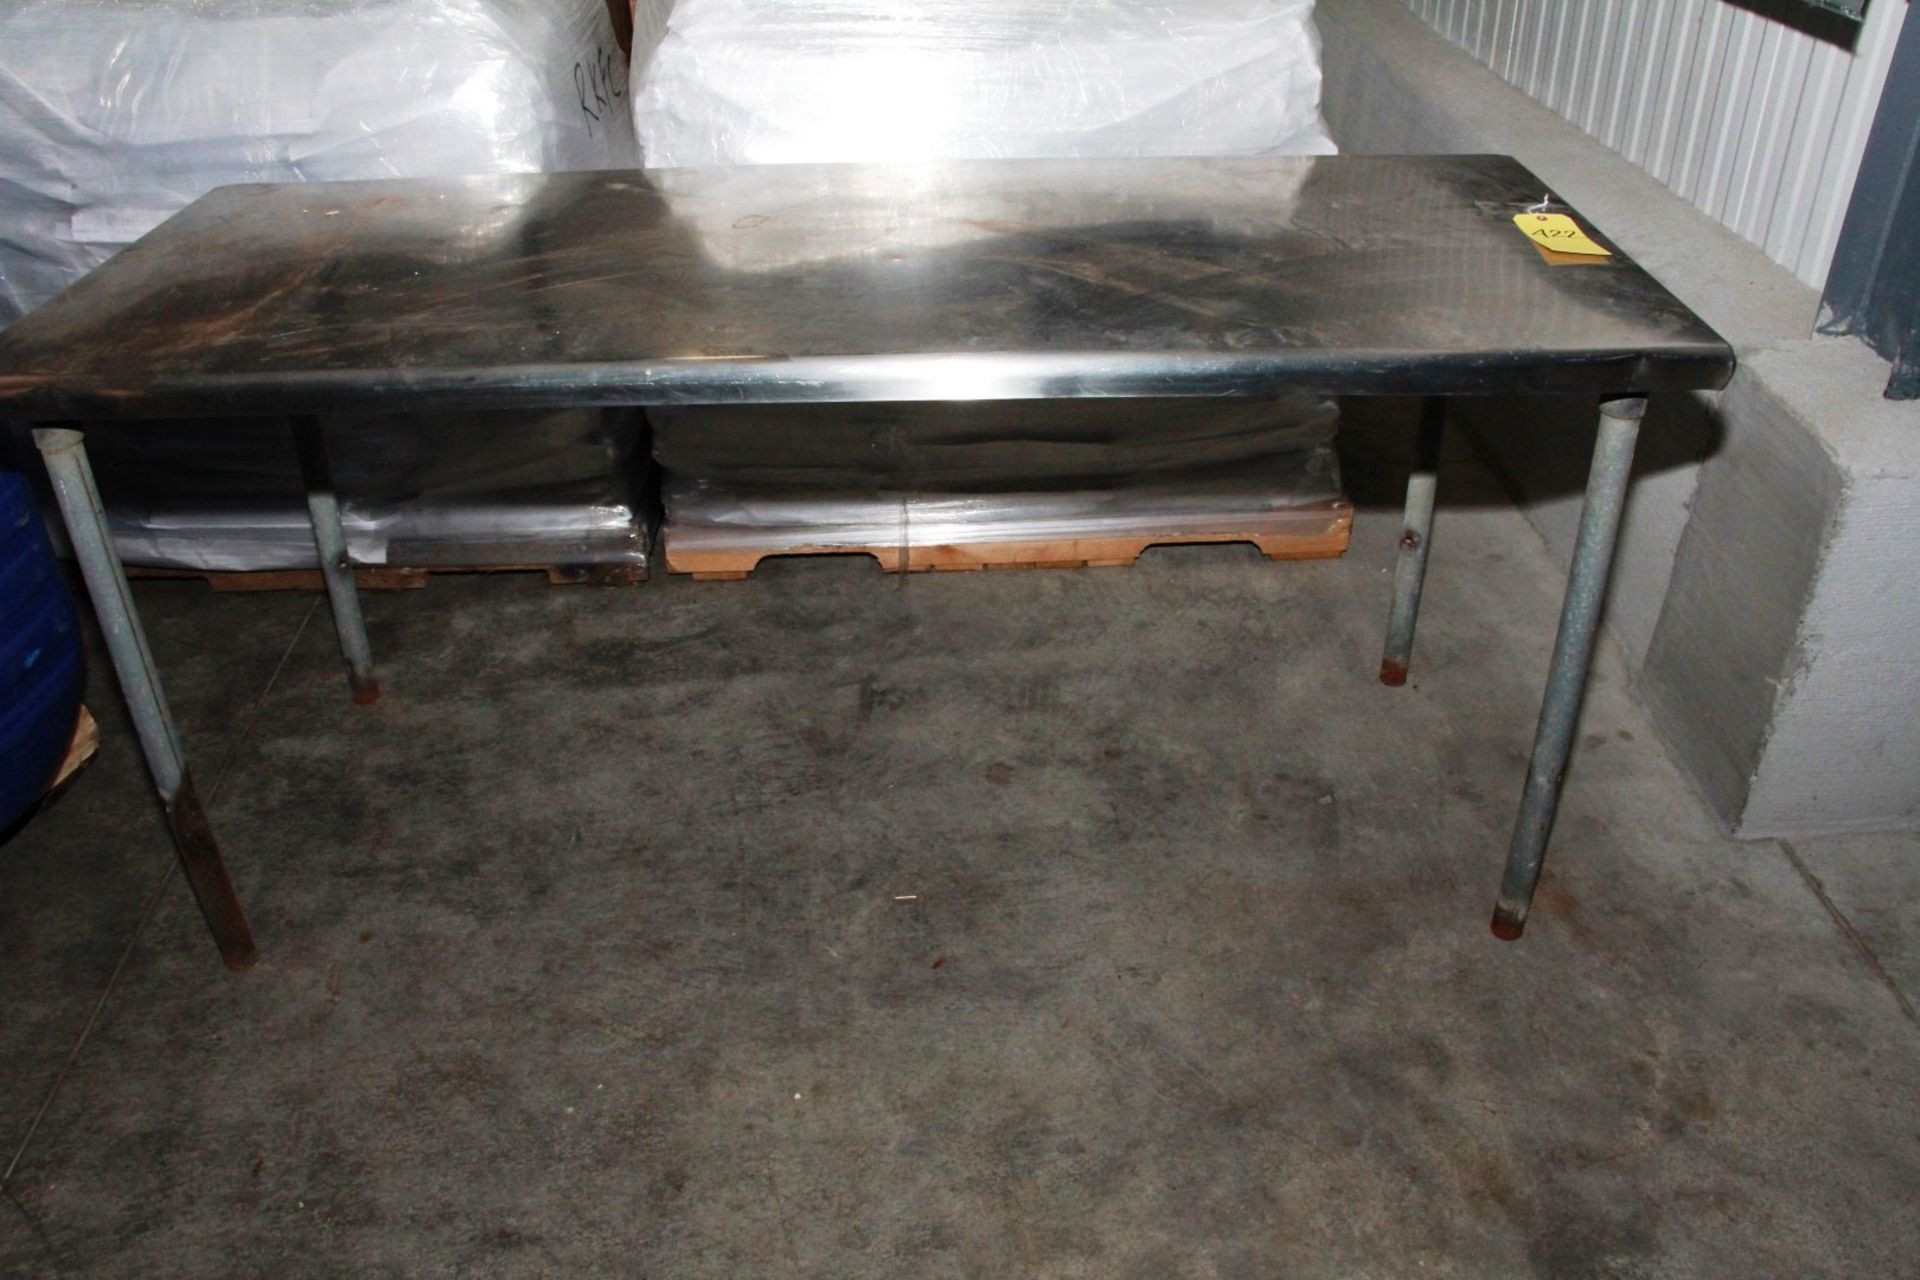 STAINLESS STEEL TABLE. 30 x 72 x 29. - Image 2 of 2